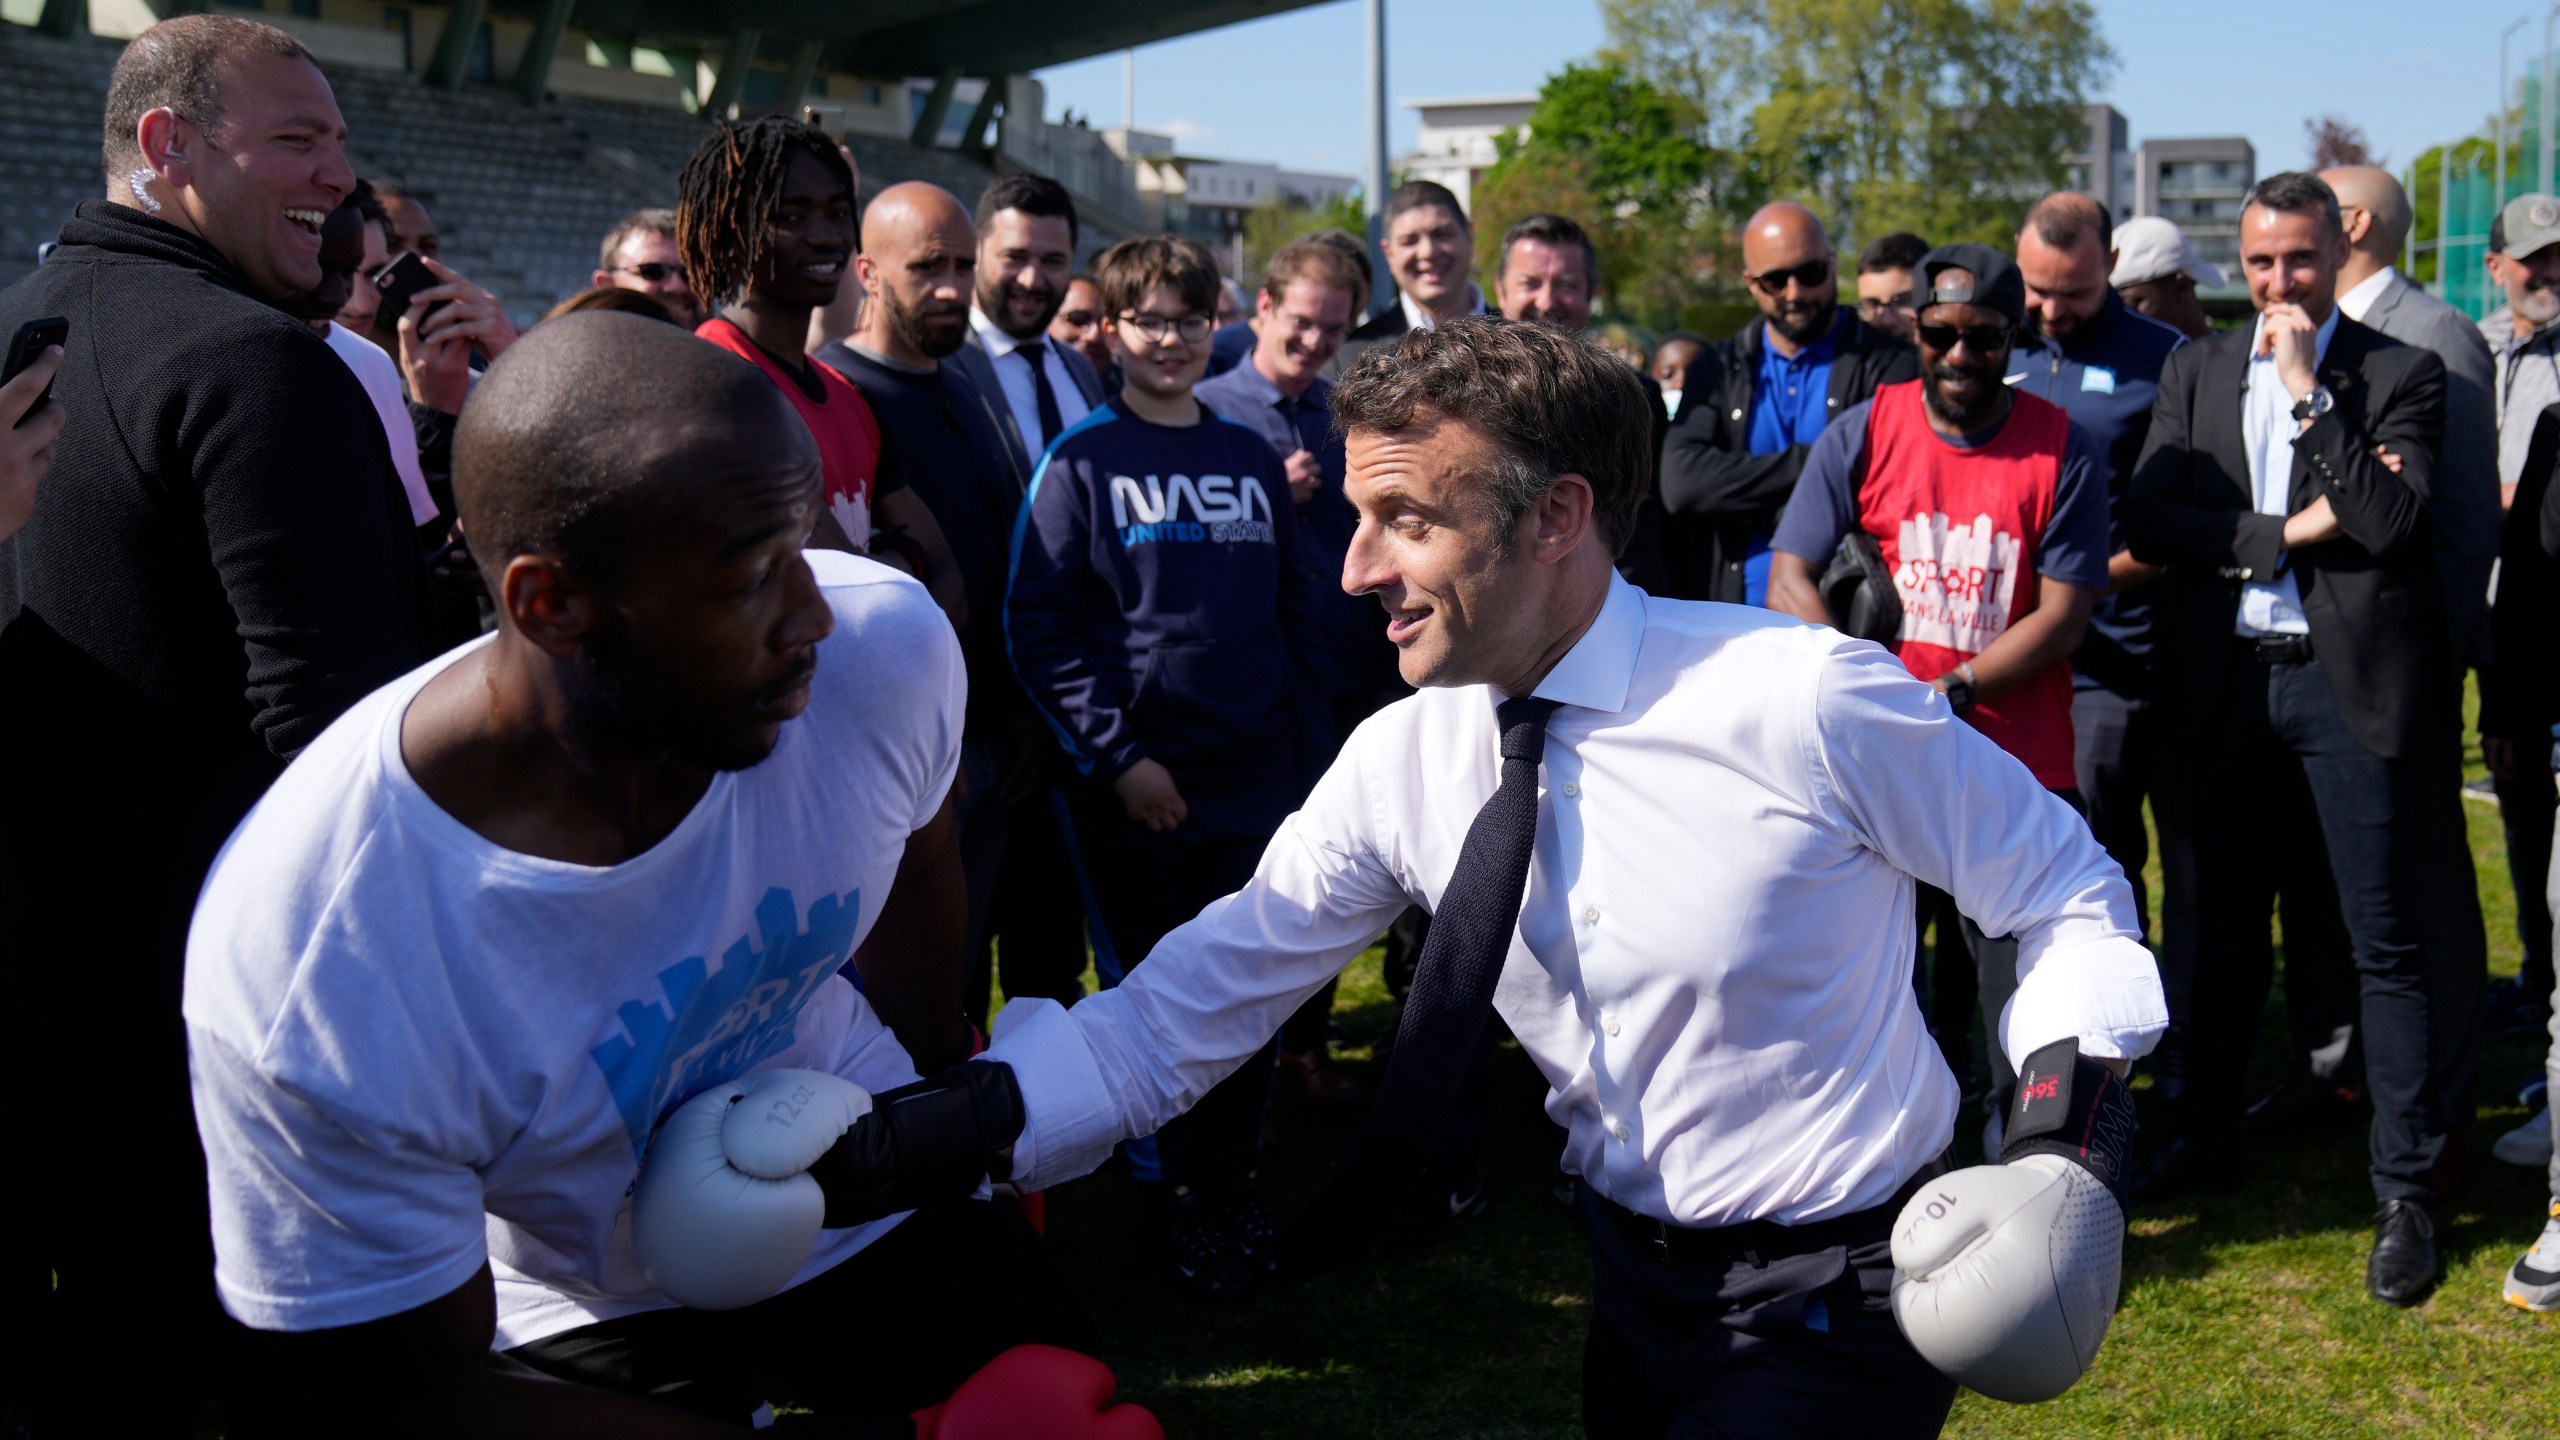 FILE - Centrist presidential candidate and French President Emmanuel Macron trains at boxing with amateur boxer Jean-Denis Nzaramba in the Auguste Delaune stadium as he campaigns in the Auguste Delaune stadium Thursday, April 21, 2022 in Saint-Denis, outside Paris. (AP Photo/Francois Mori, Pool, File)